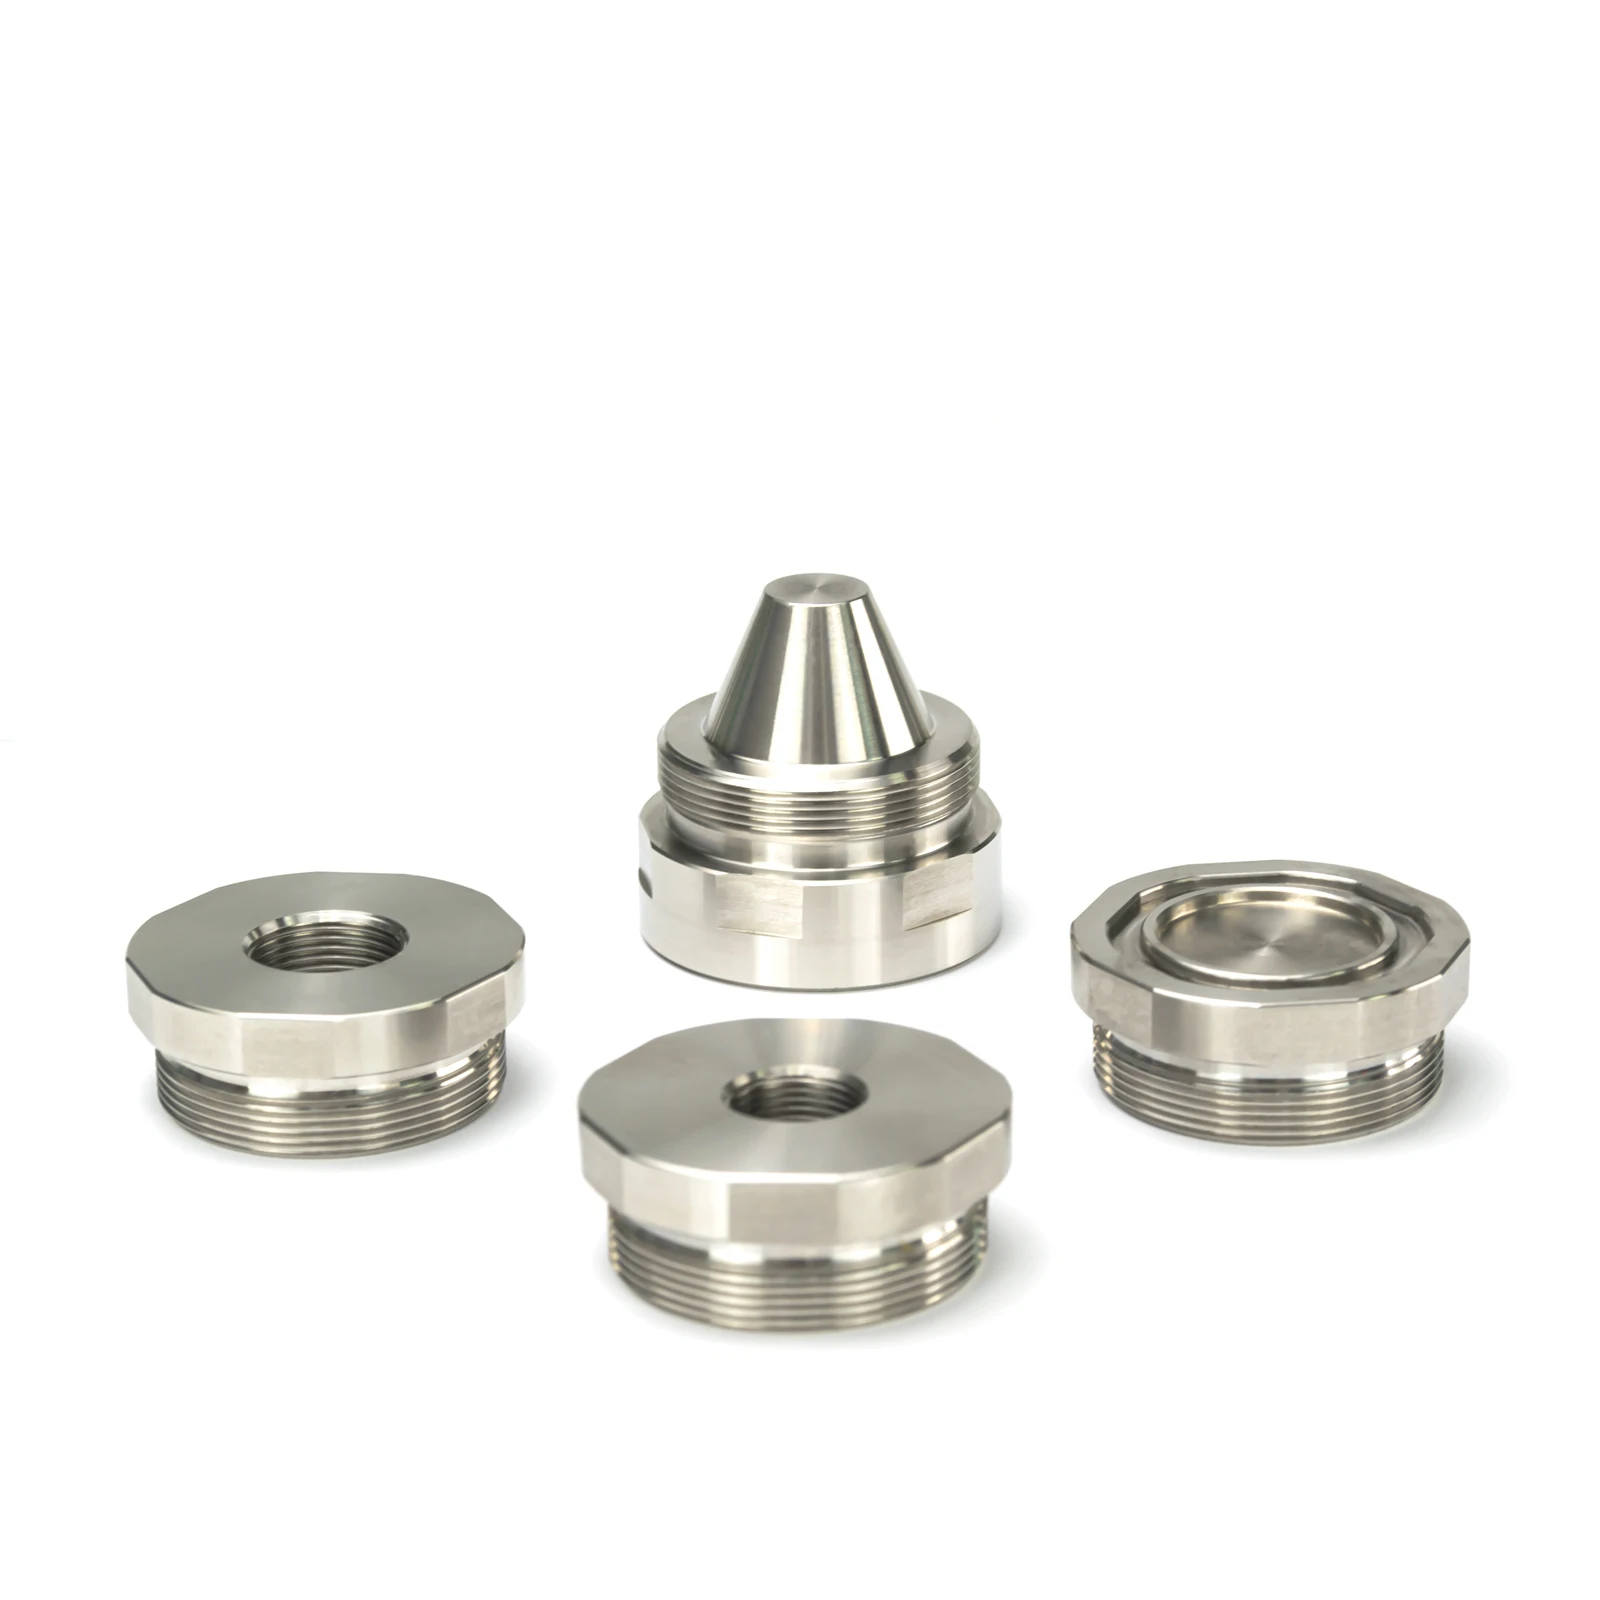 7L 1.5''OD 17-4 Stainless Steel Dodecagonal Modular Cleaning Tube Filter 1.375x24 MST 8x Cups with 1/2x28 + 5/8x24 End Caps